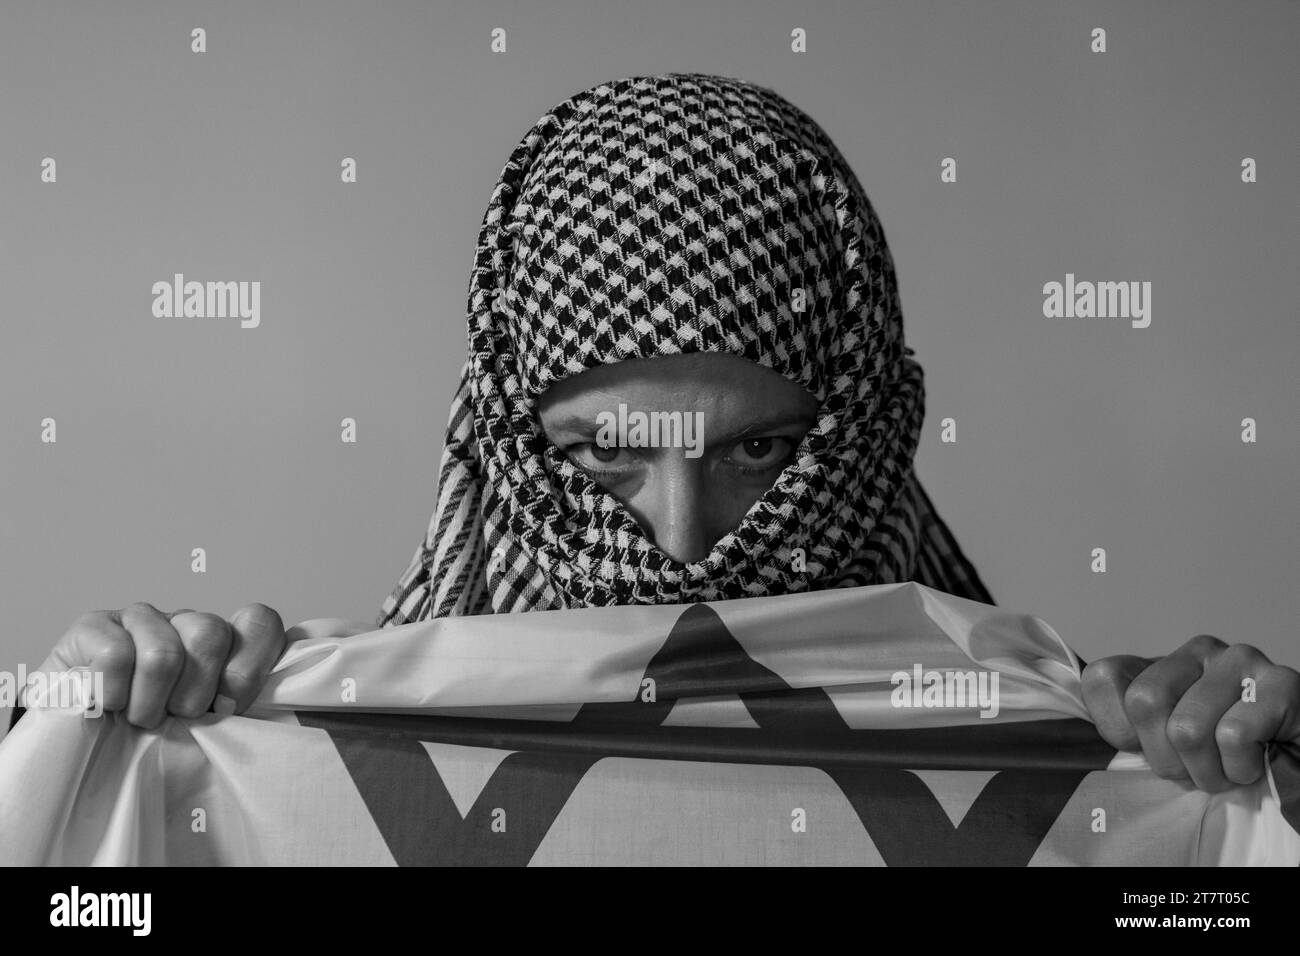 Green-eyed woman with Palestinian headscarf carrying an Israeli flag. Conflict concept Stock Photo